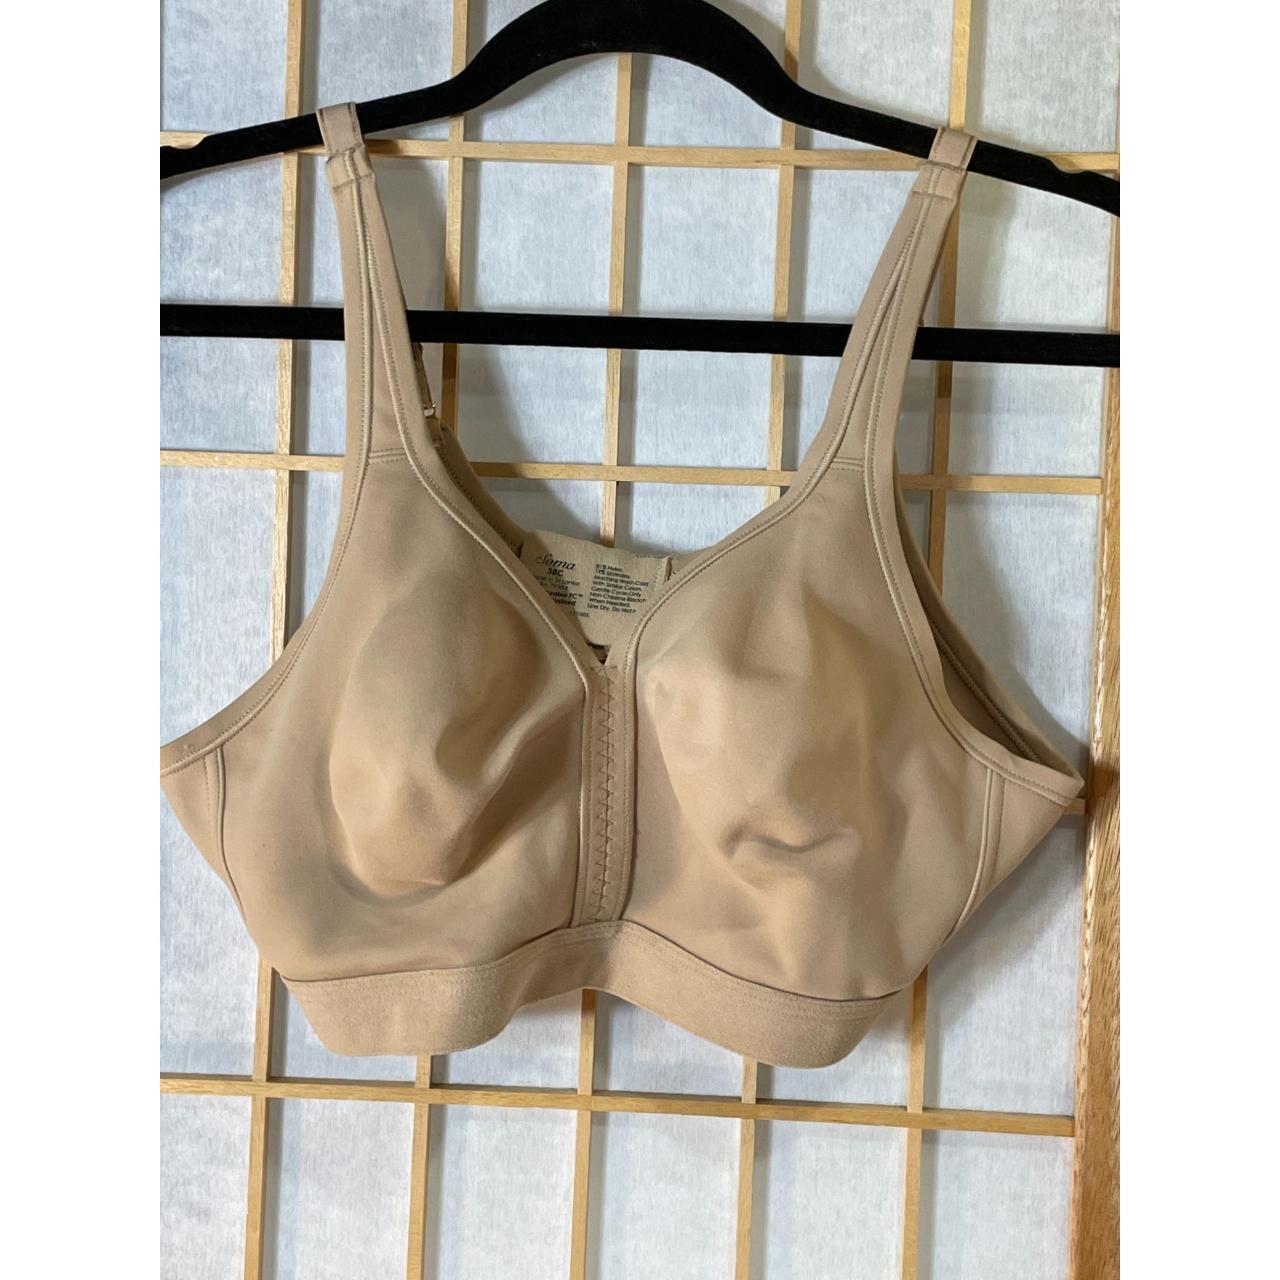 Classic nude bra from Soma. Size 38C. Embraceable FC